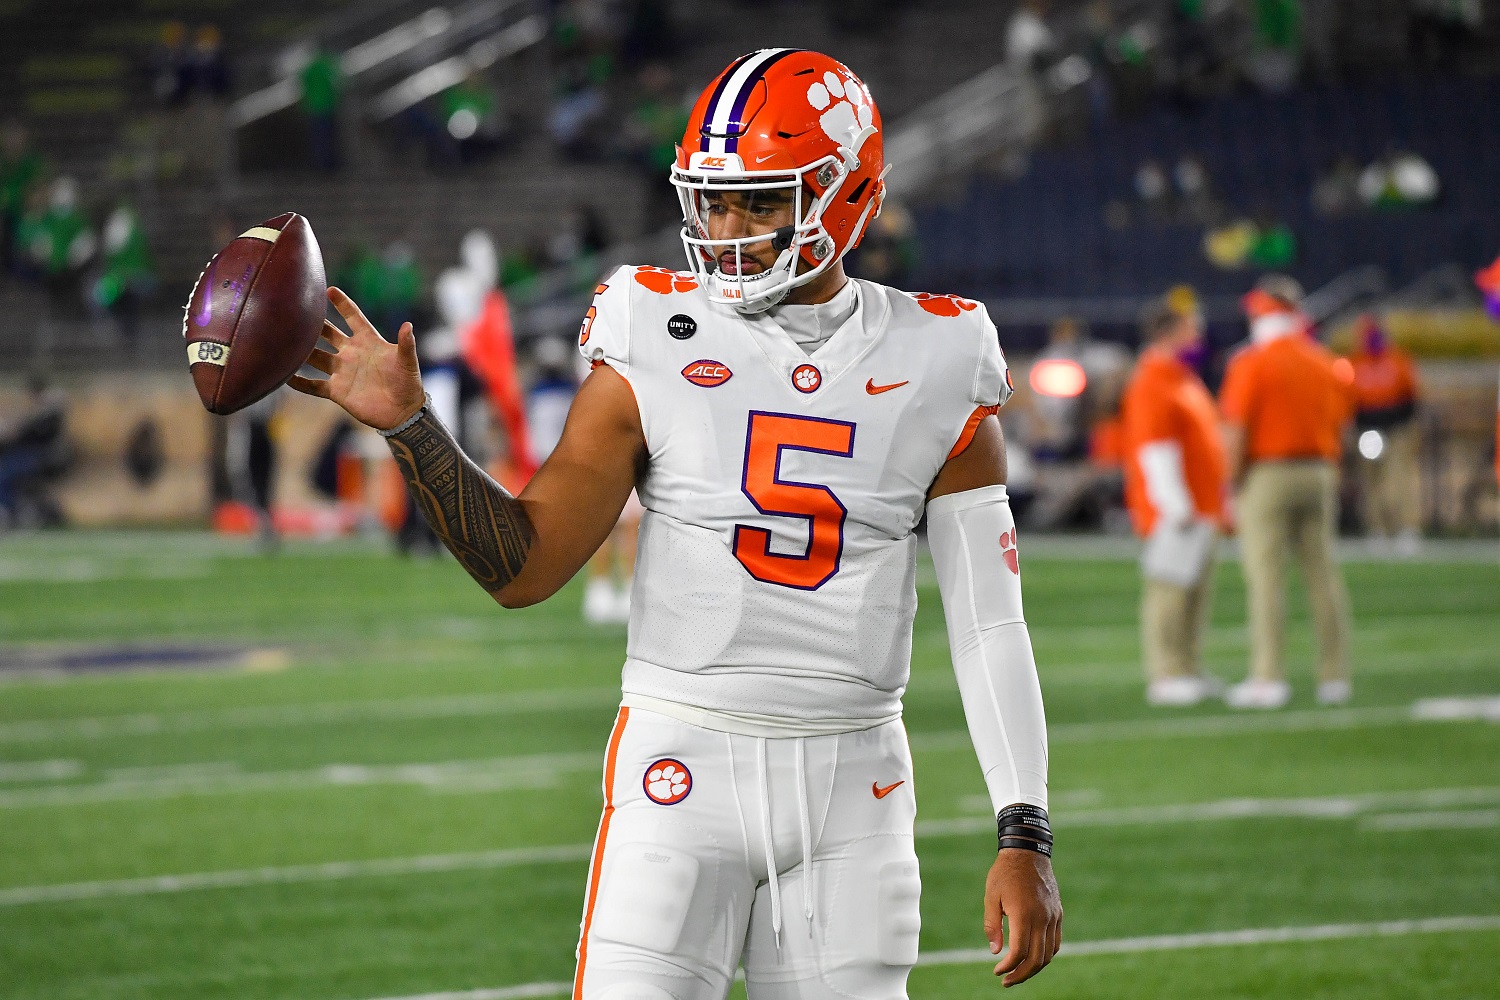 Clemson quarterback D.J. Uiagalelei warms up before the game against Notre Dame on Nov. 7, 2020, in South Bend, Indiana.